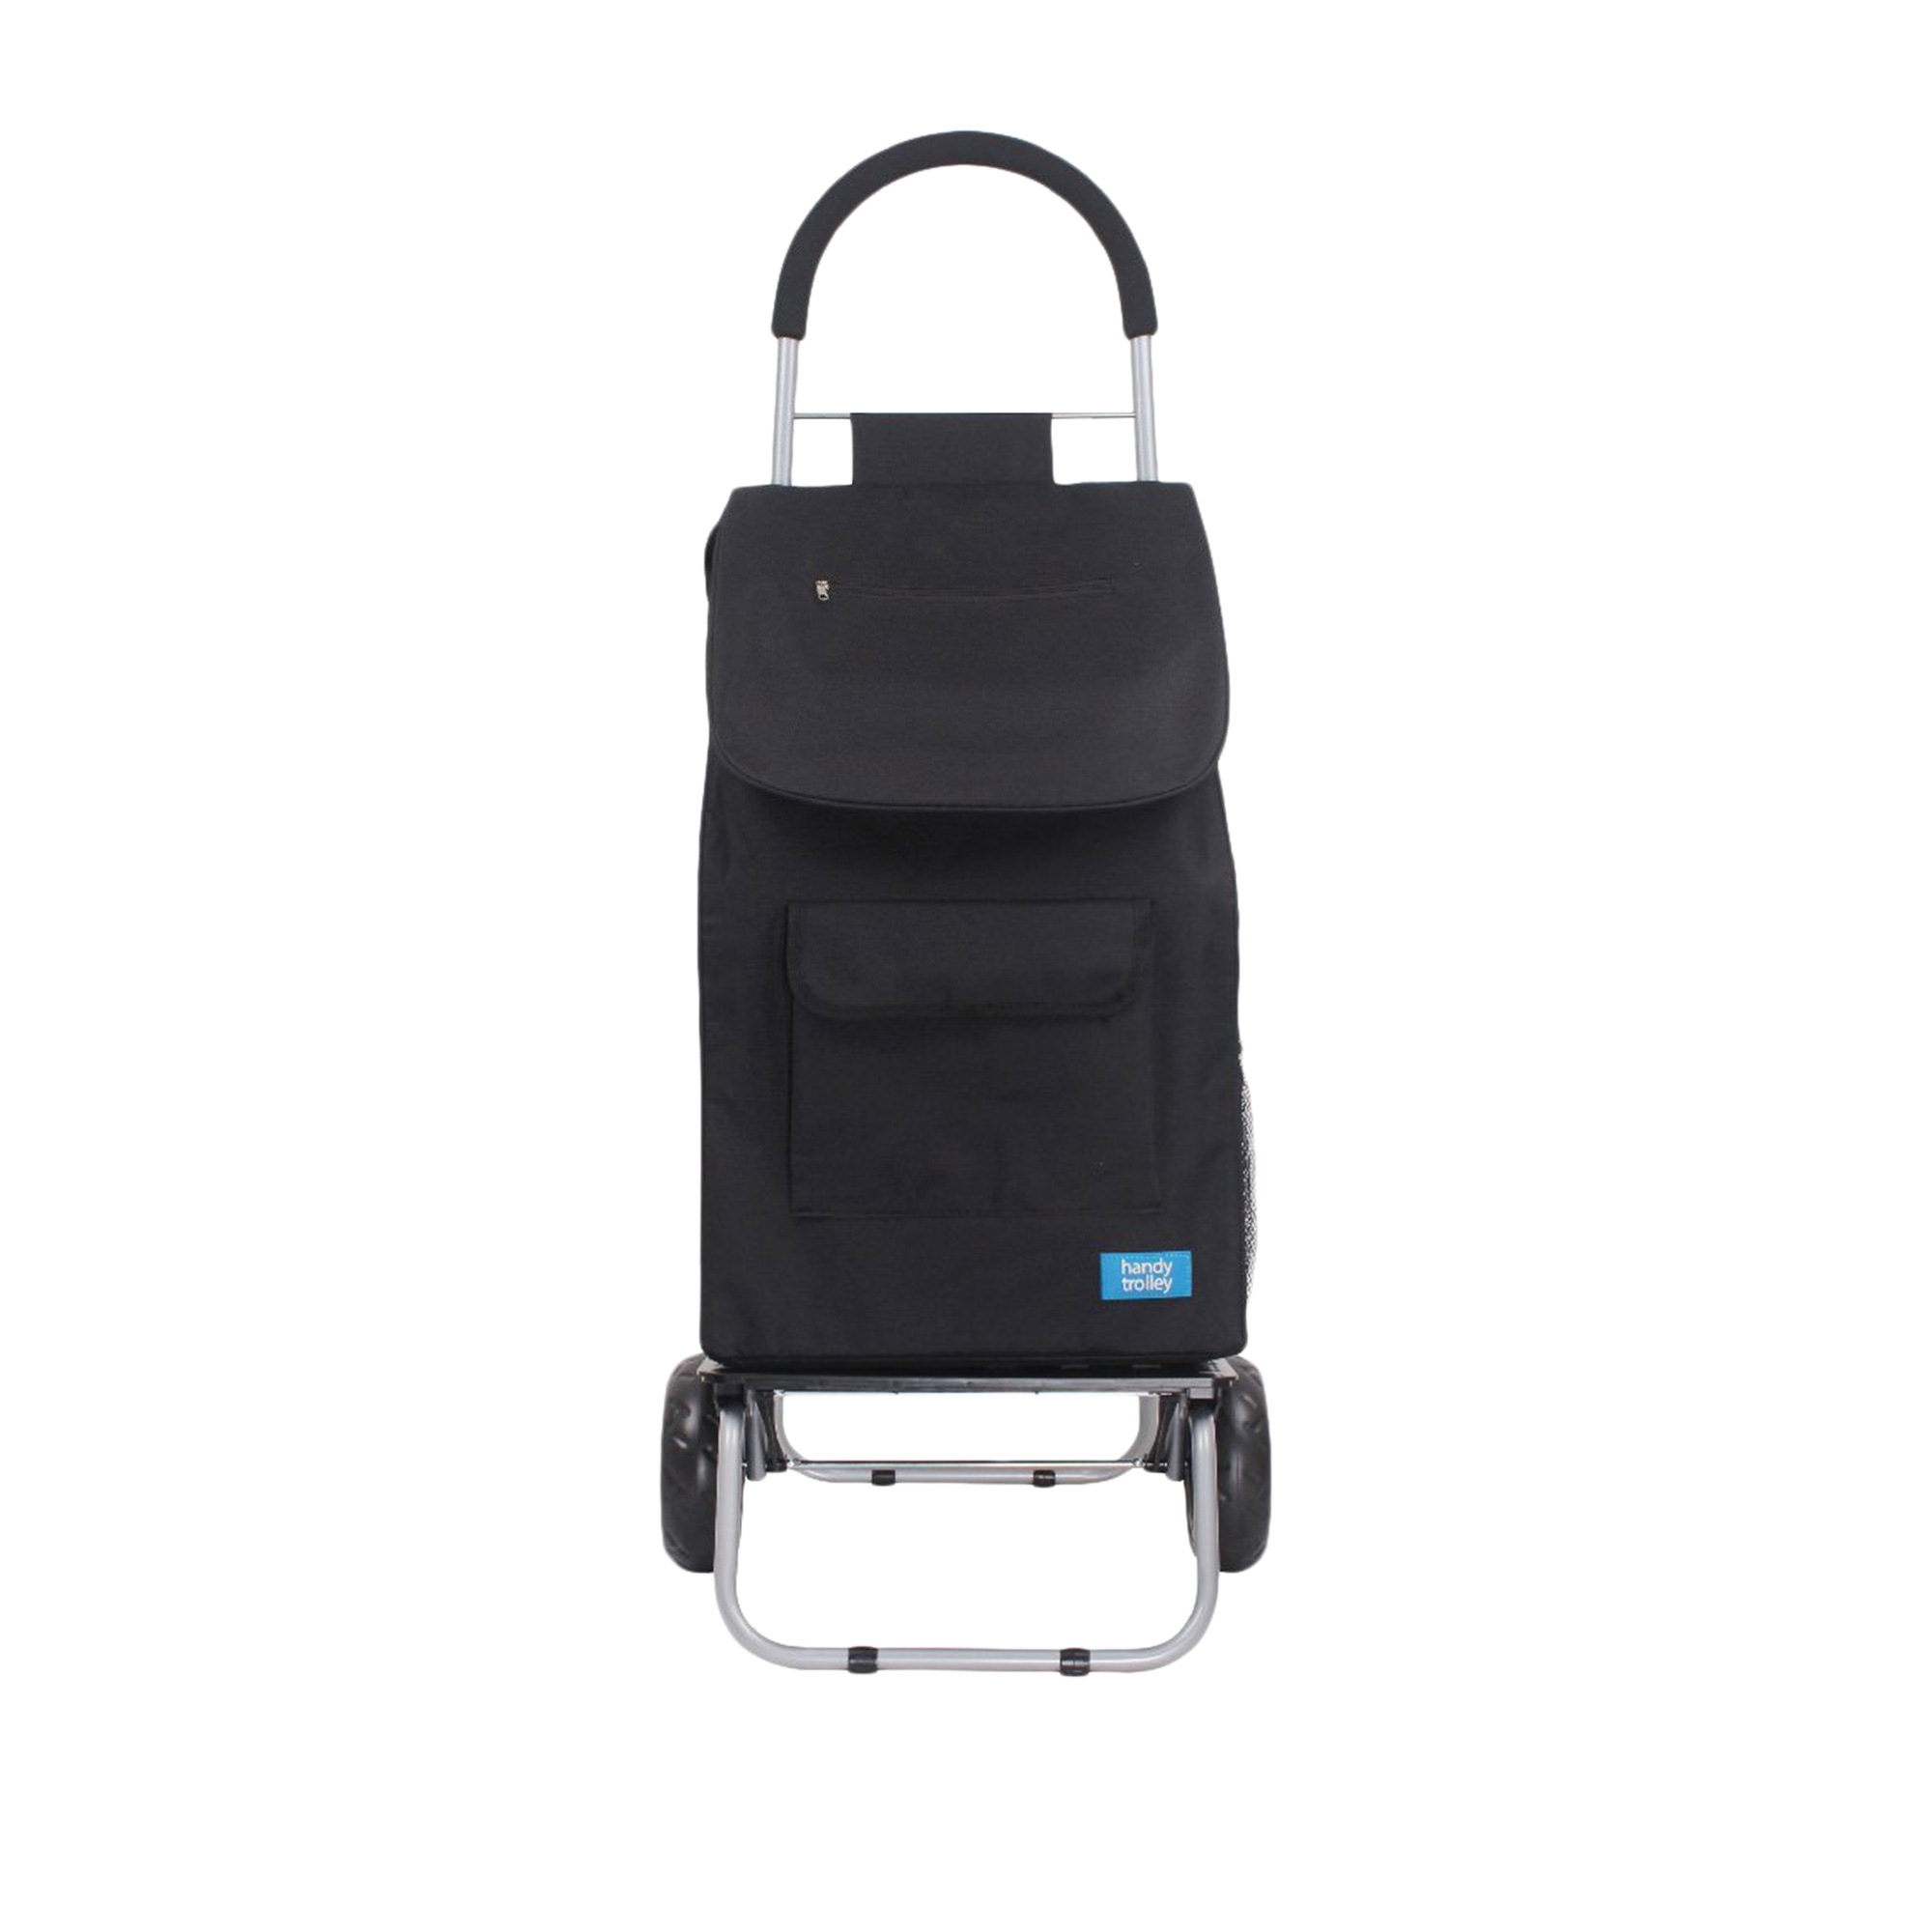 White Magic Handy Trolley with Seat Black Image 1